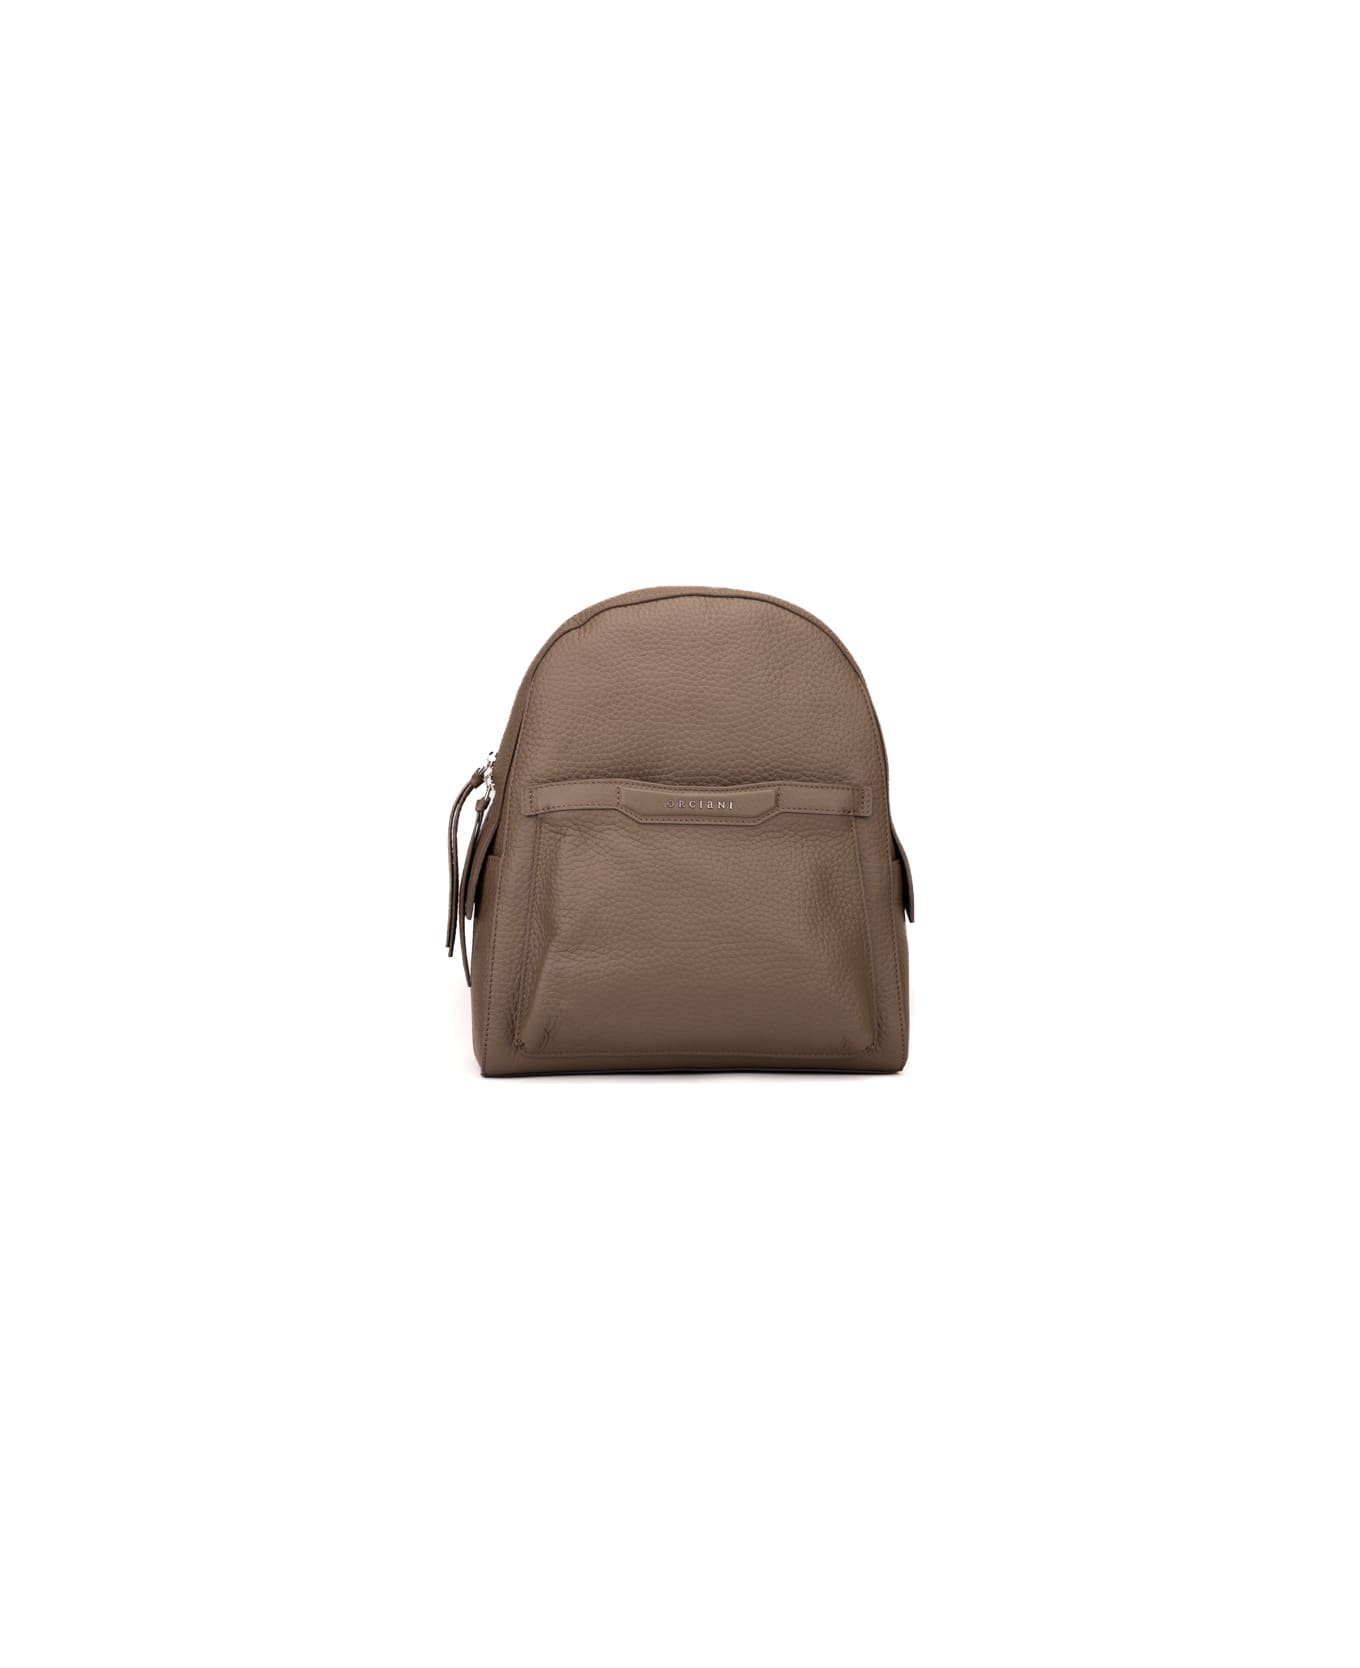 Orciani Posh Soft Backpack In Leather - Marrone